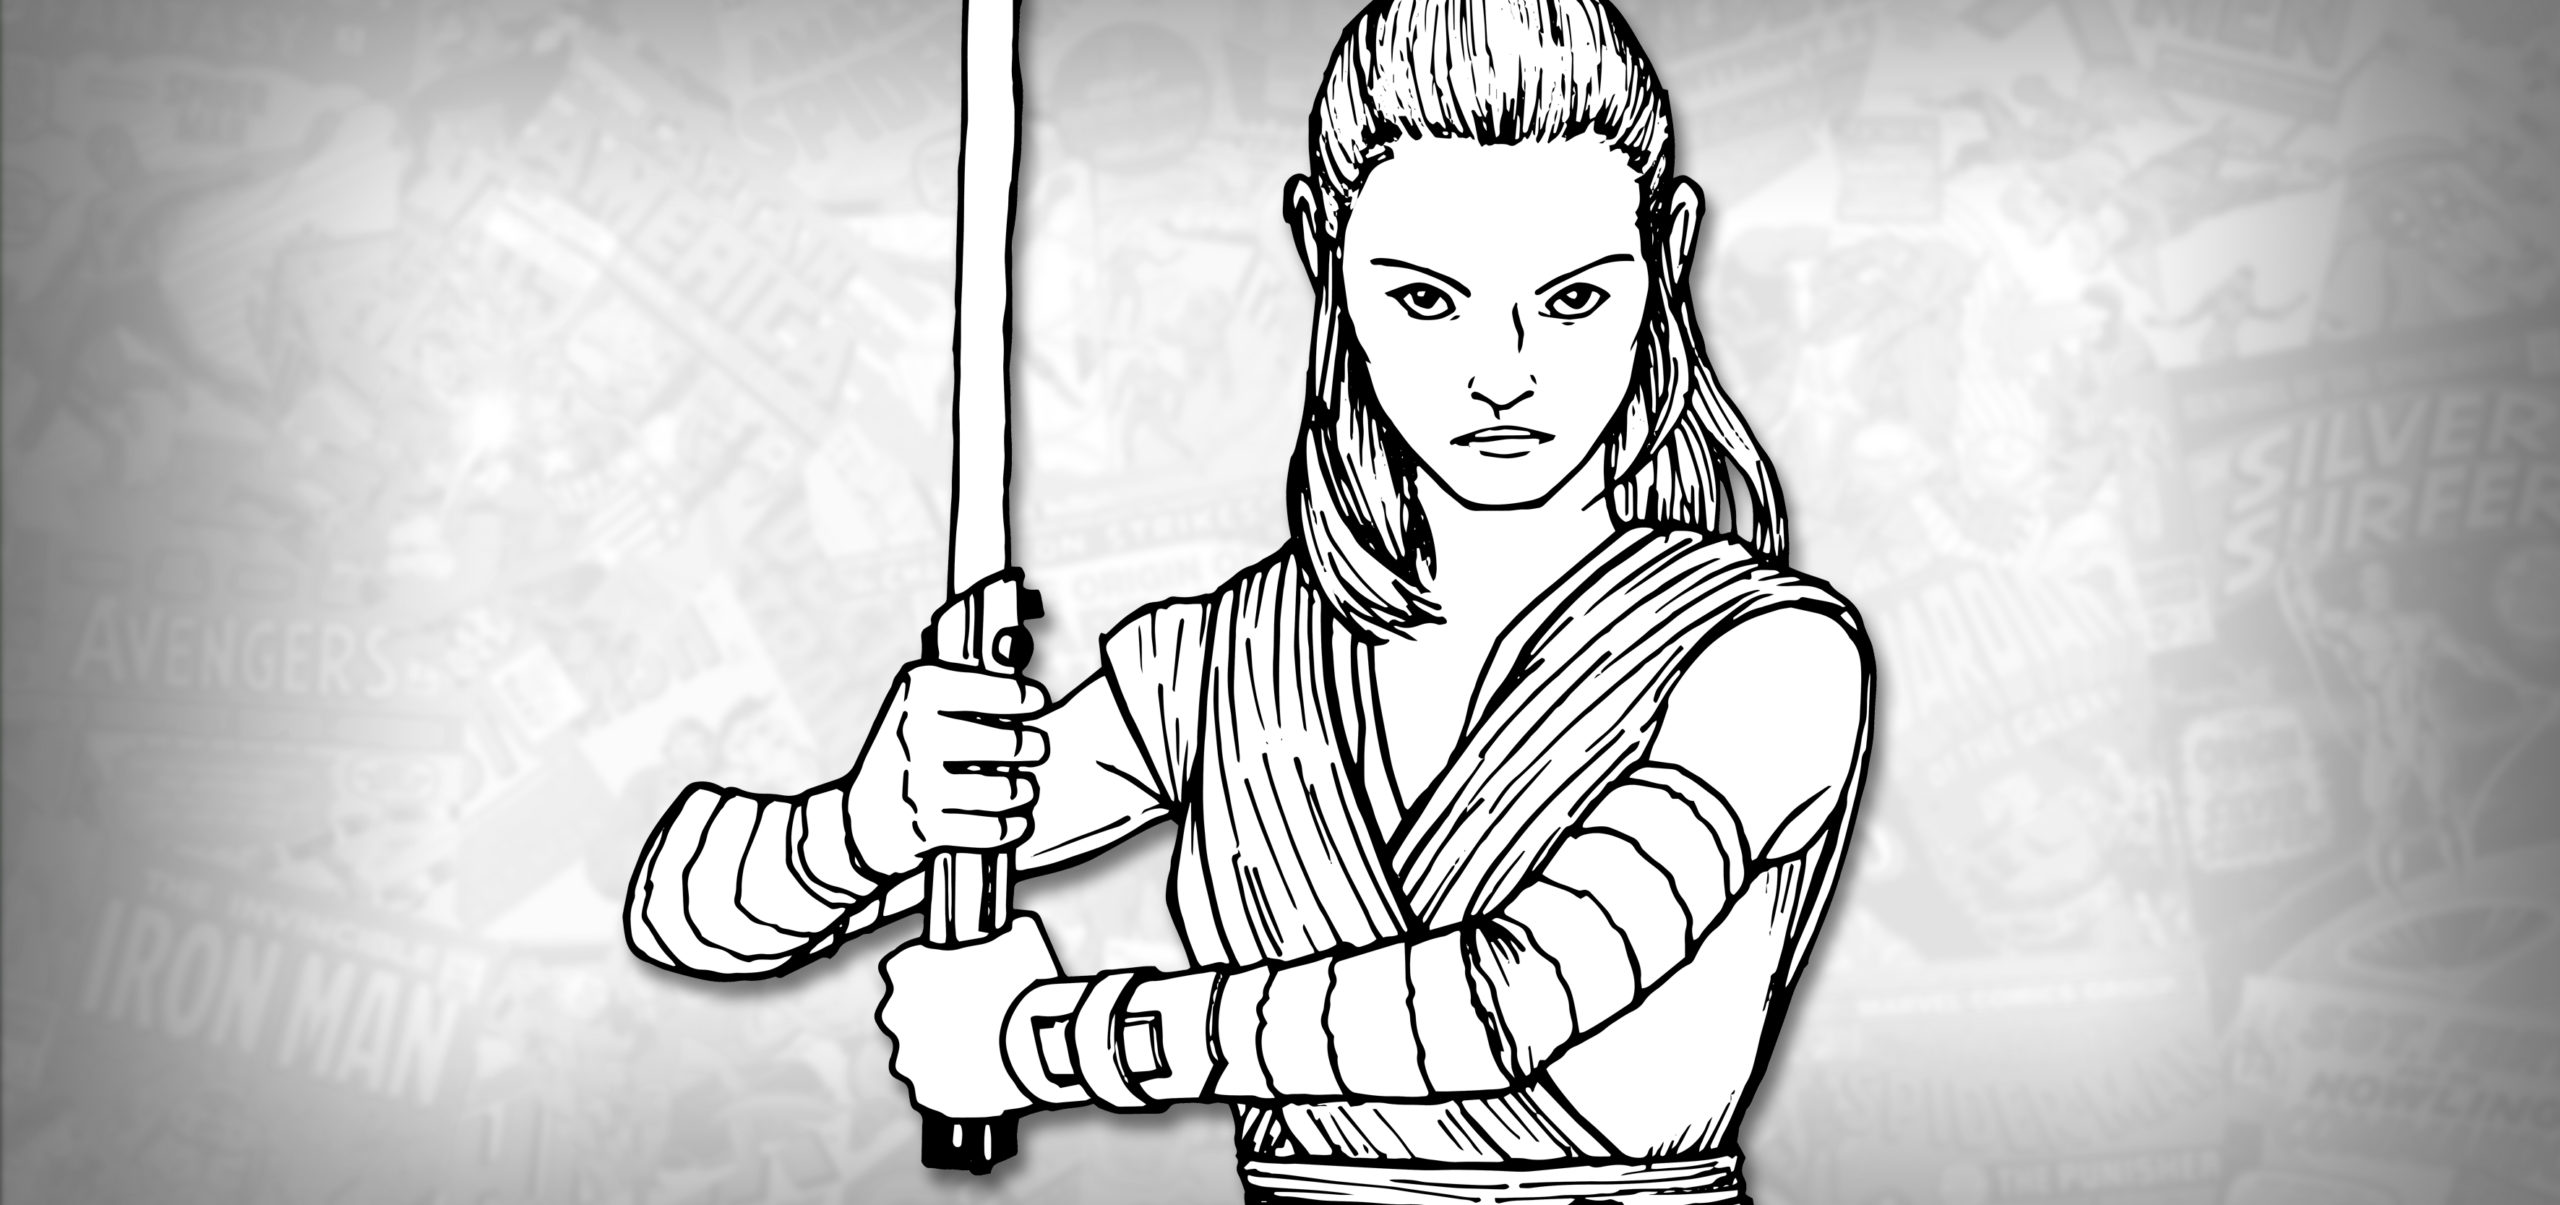 anton kobelev recommends how to draw rey star wars pic